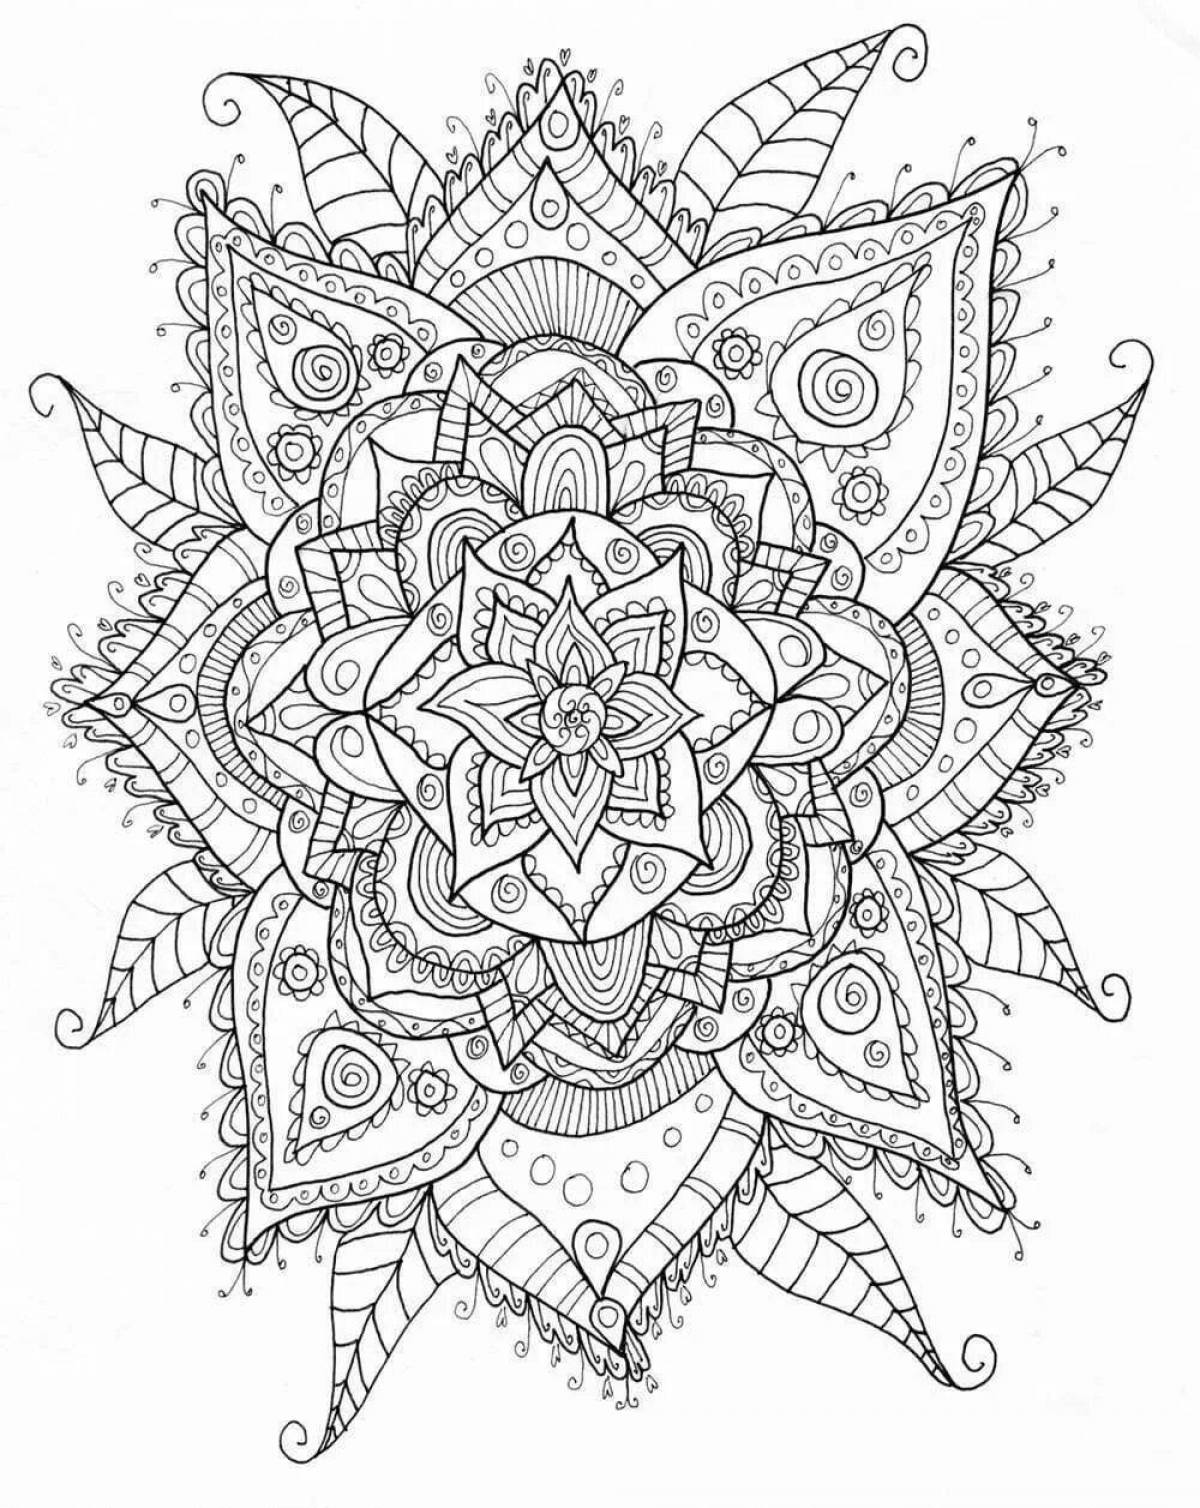 Sublime coloring page video antistress mysterious mandalas